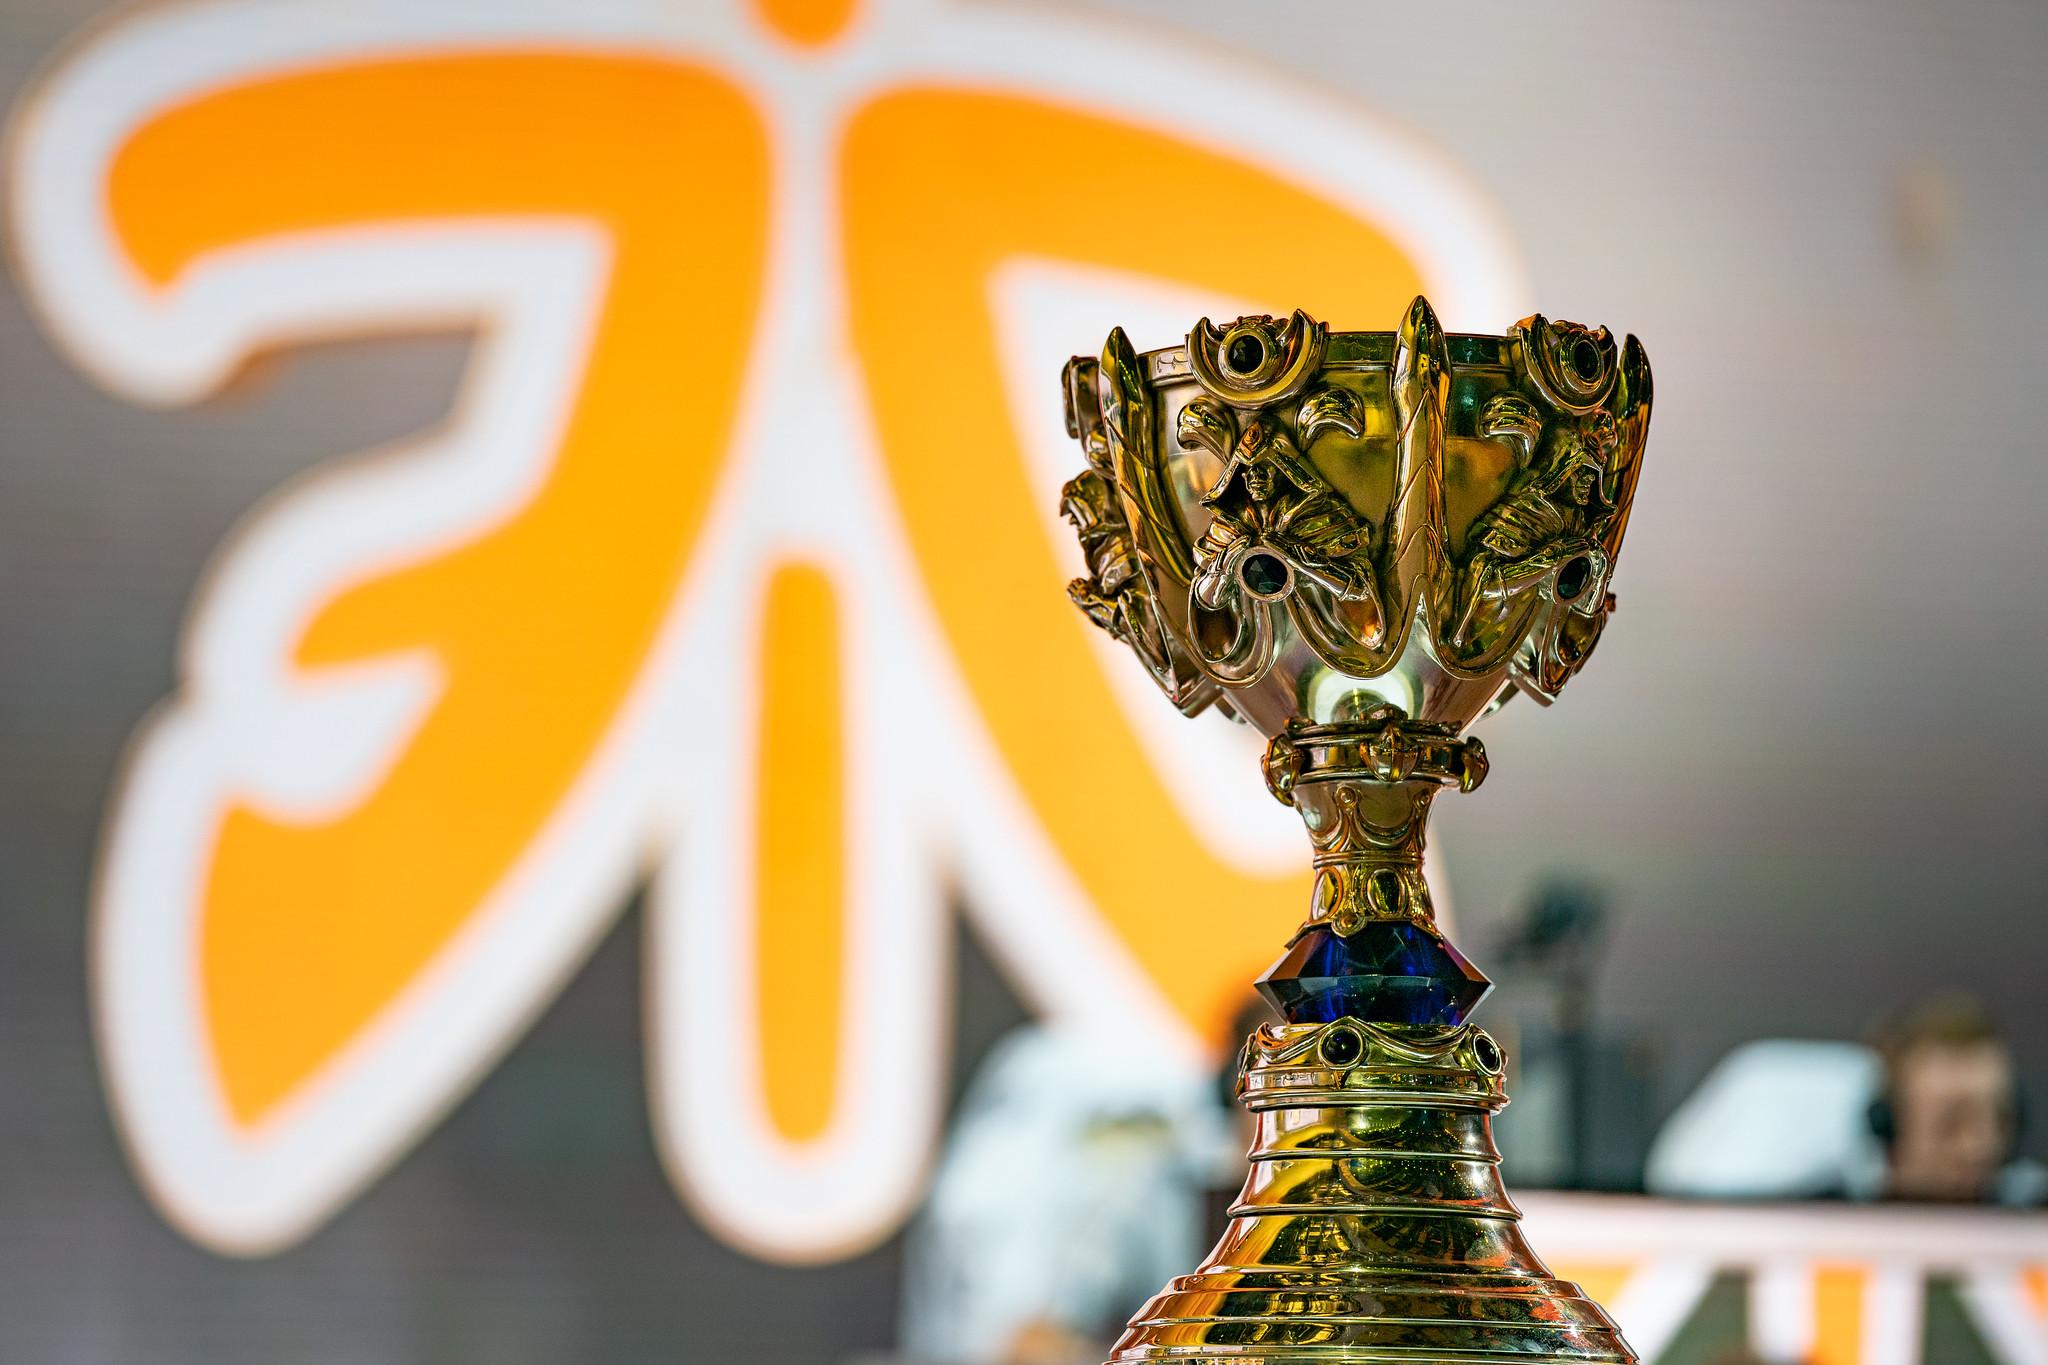 Season 1 winners Fnatic is the only returning title-holders, after Chinese champions FunPlus Phoenix and Invictus Gaming failed to qualify.